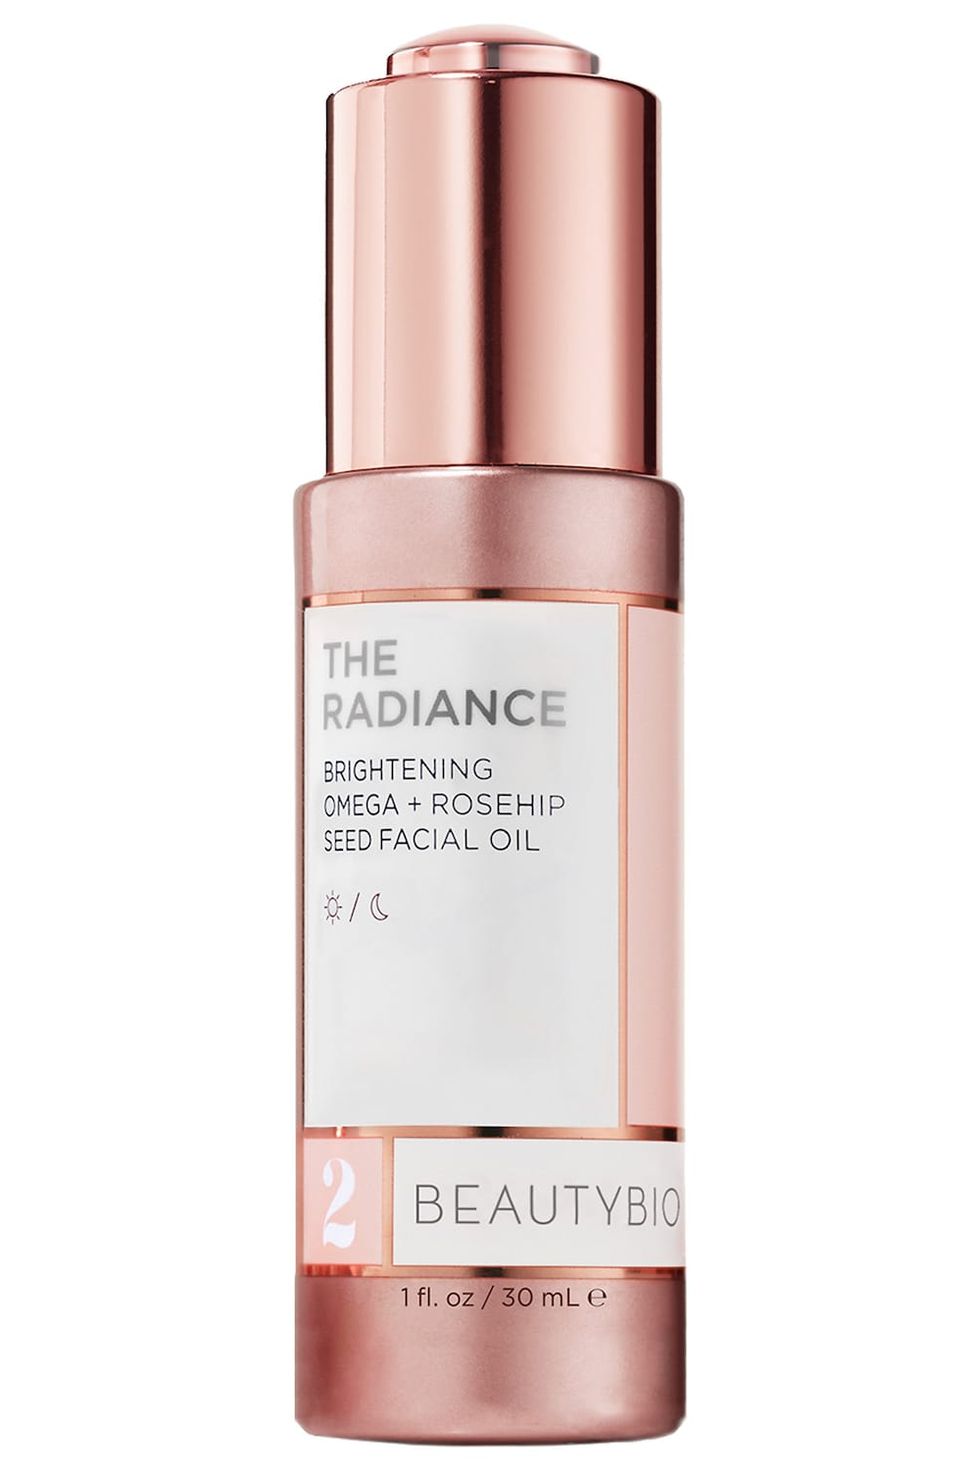 The Radiance Brightening Vitamin E + Rosehip Seed Facial Oil